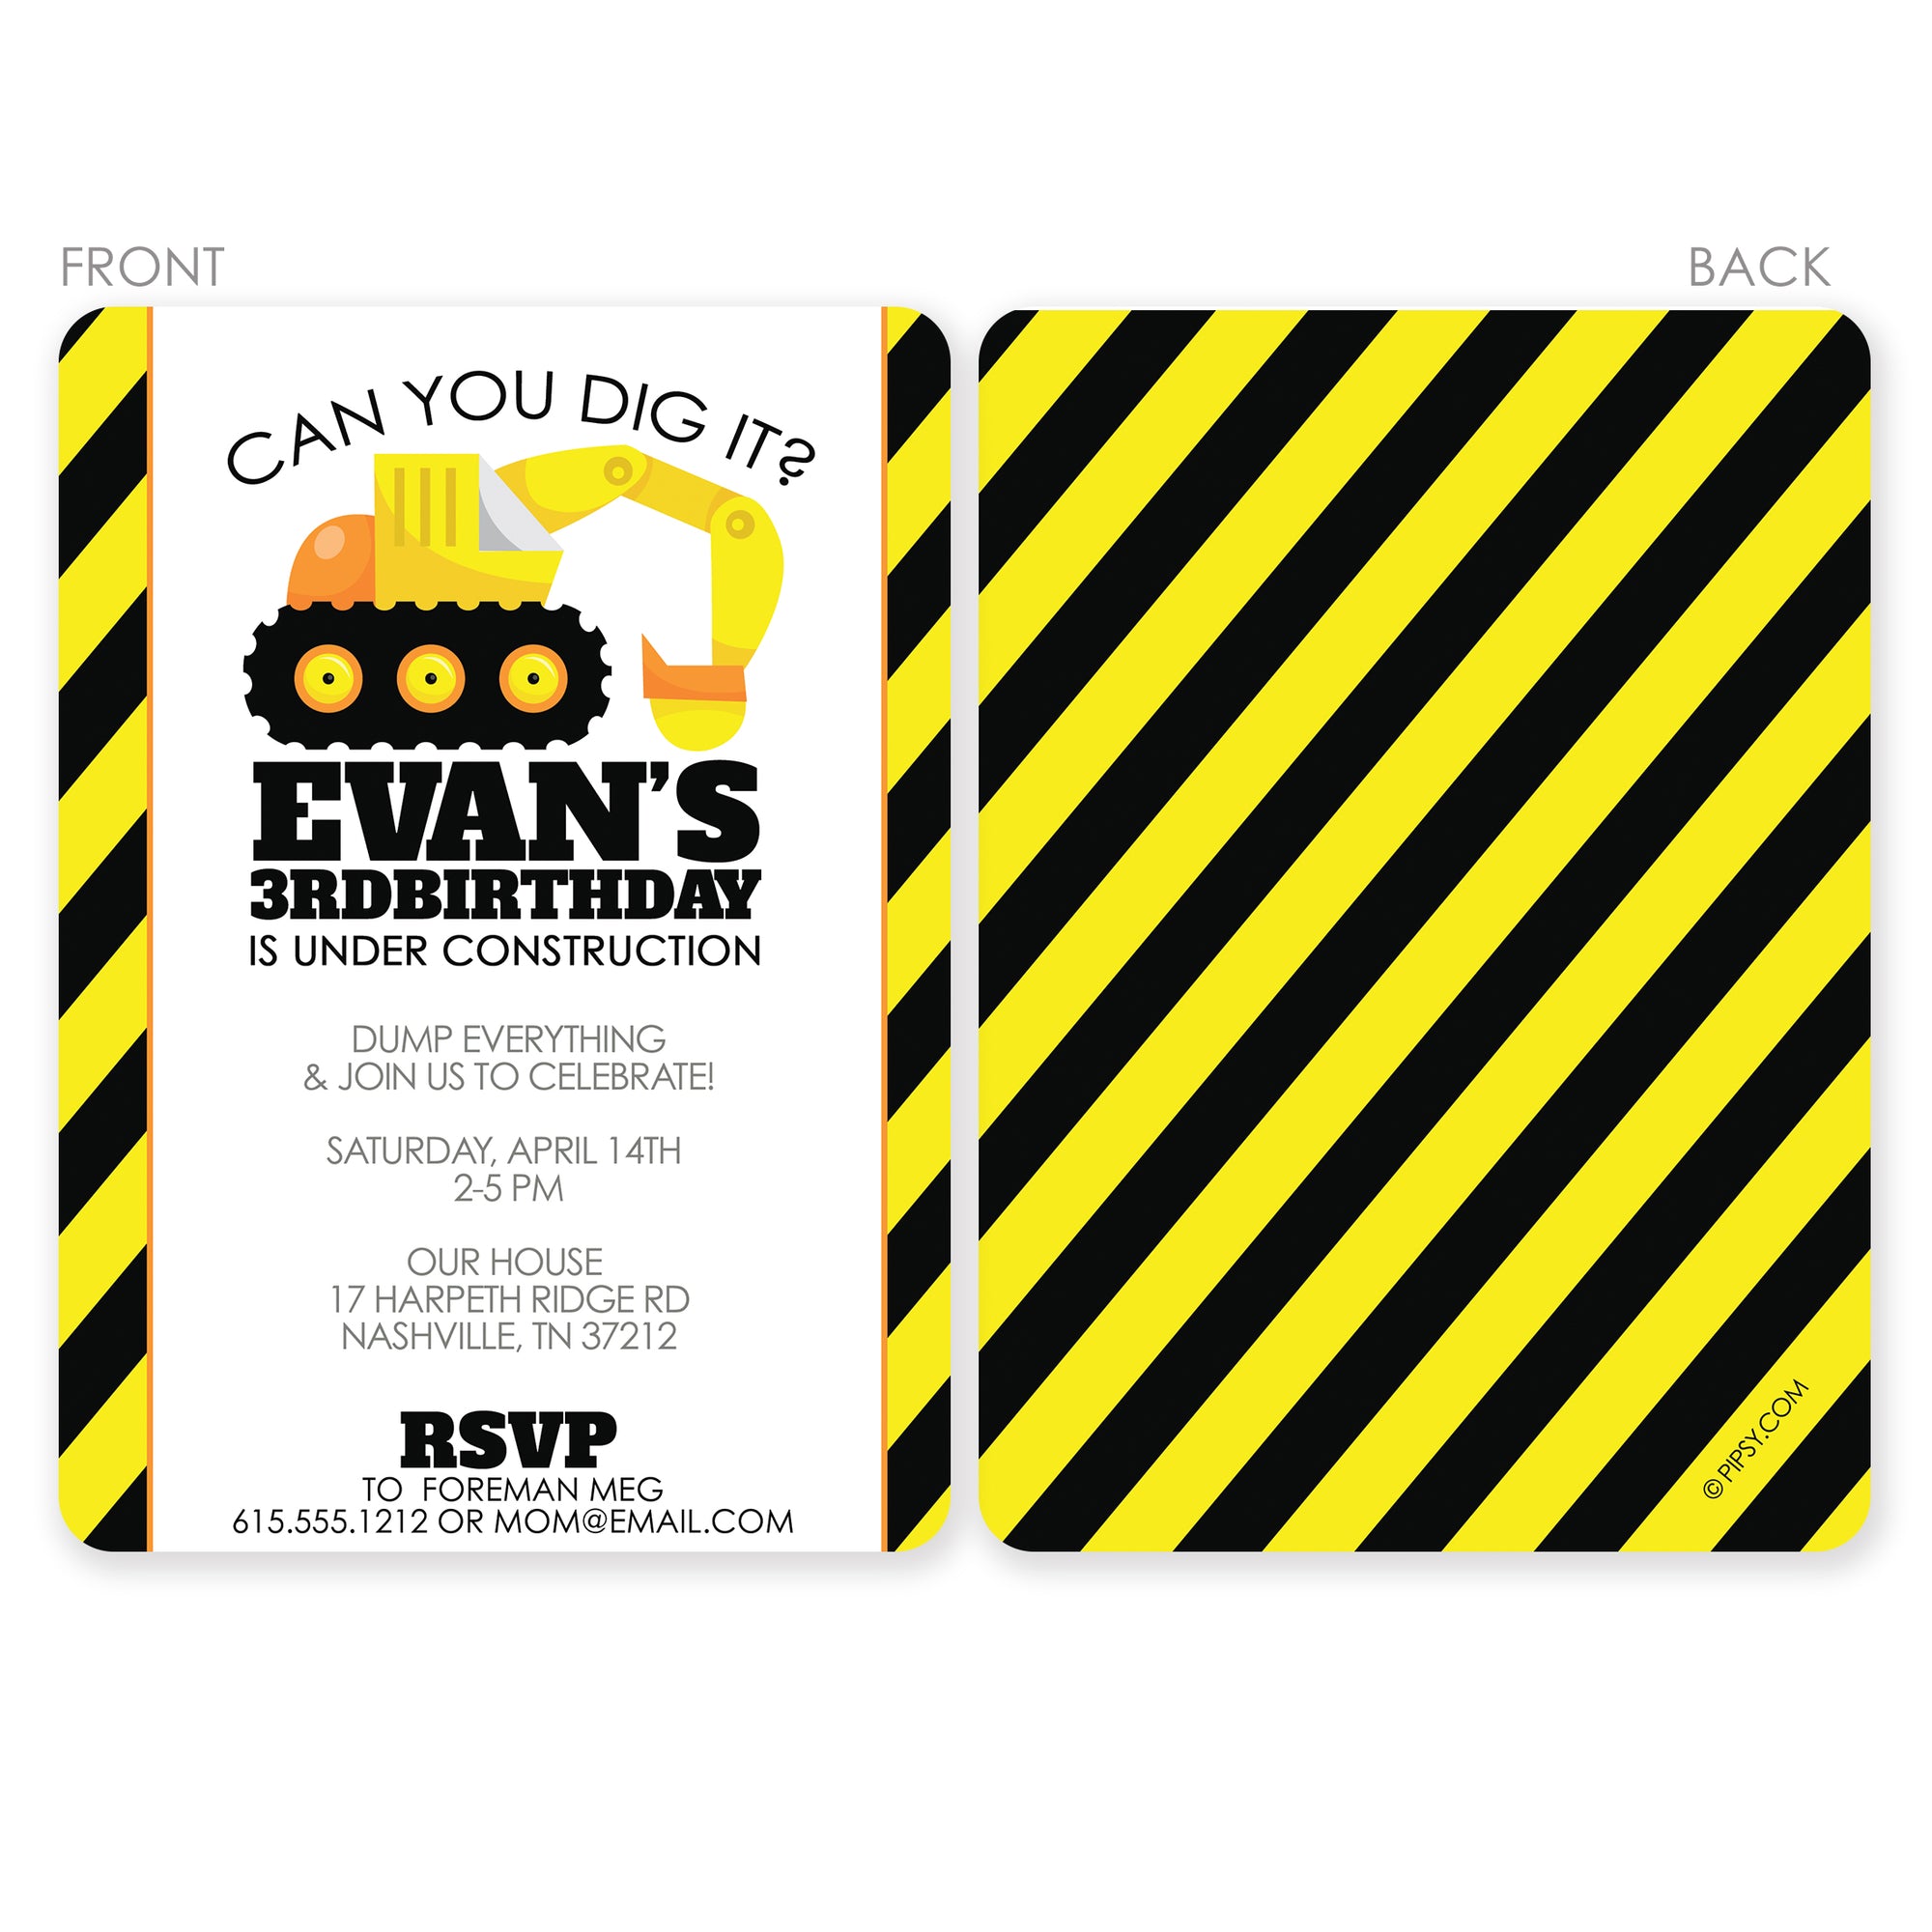 Backhoe Digger Party Birthday Invitation | PIPSY.COM | Black & Yellow, printed on thick cardstock with 2 sided printing, we can add a photo to the back